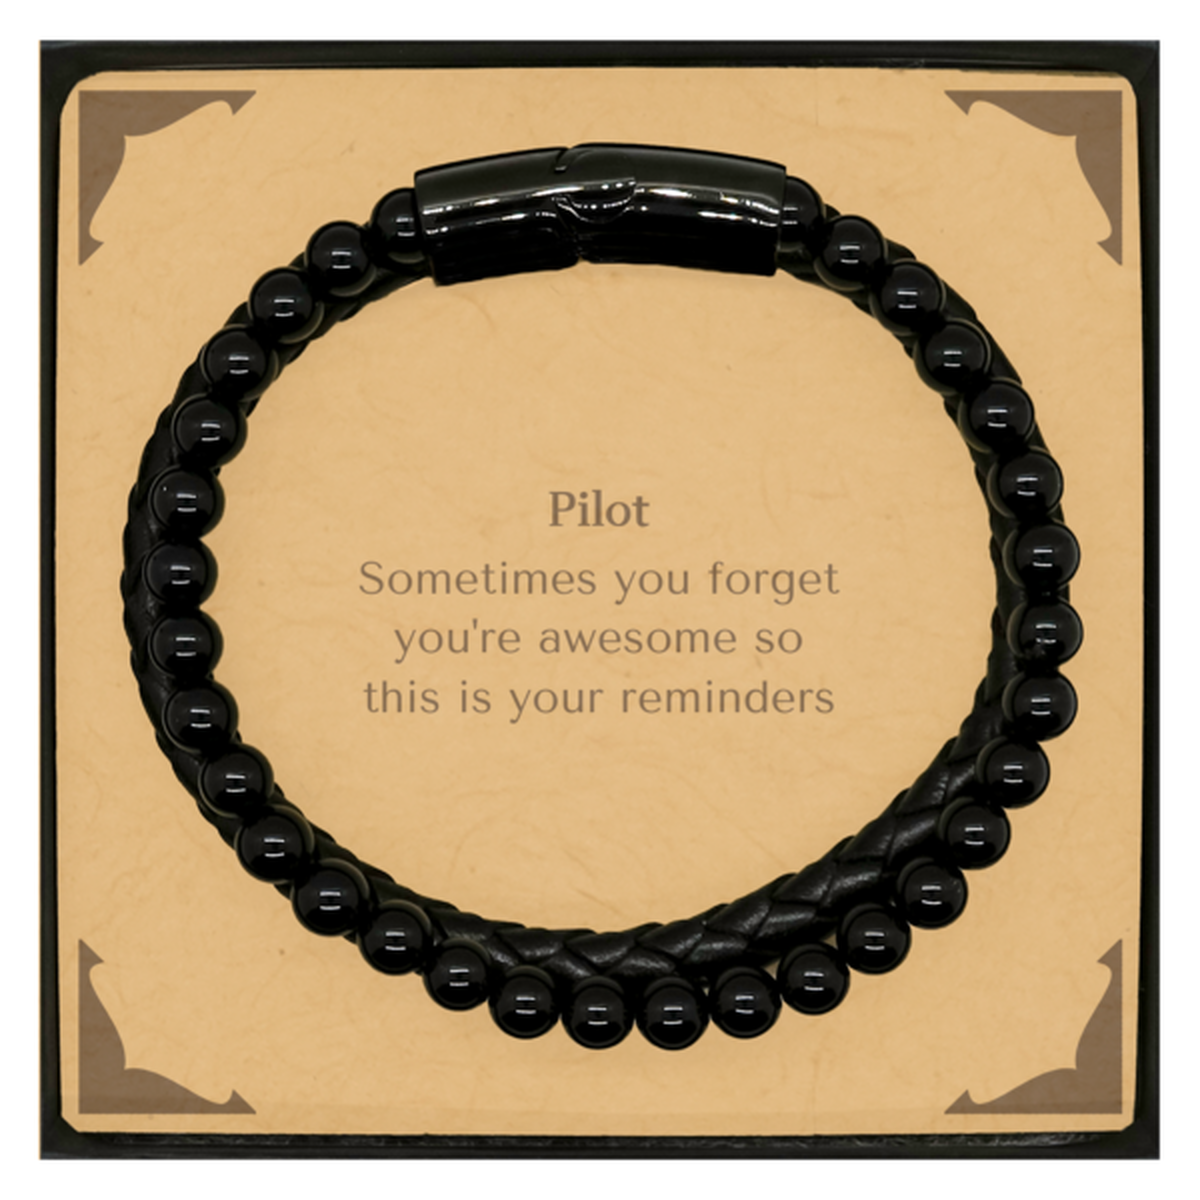 Sentimental Pilot Stone Leather Bracelets, Pilot Sometimes you forget you're awesome so this is your reminders, Graduation Christmas Birthday Gifts for Pilot, Men, Women, Coworkers